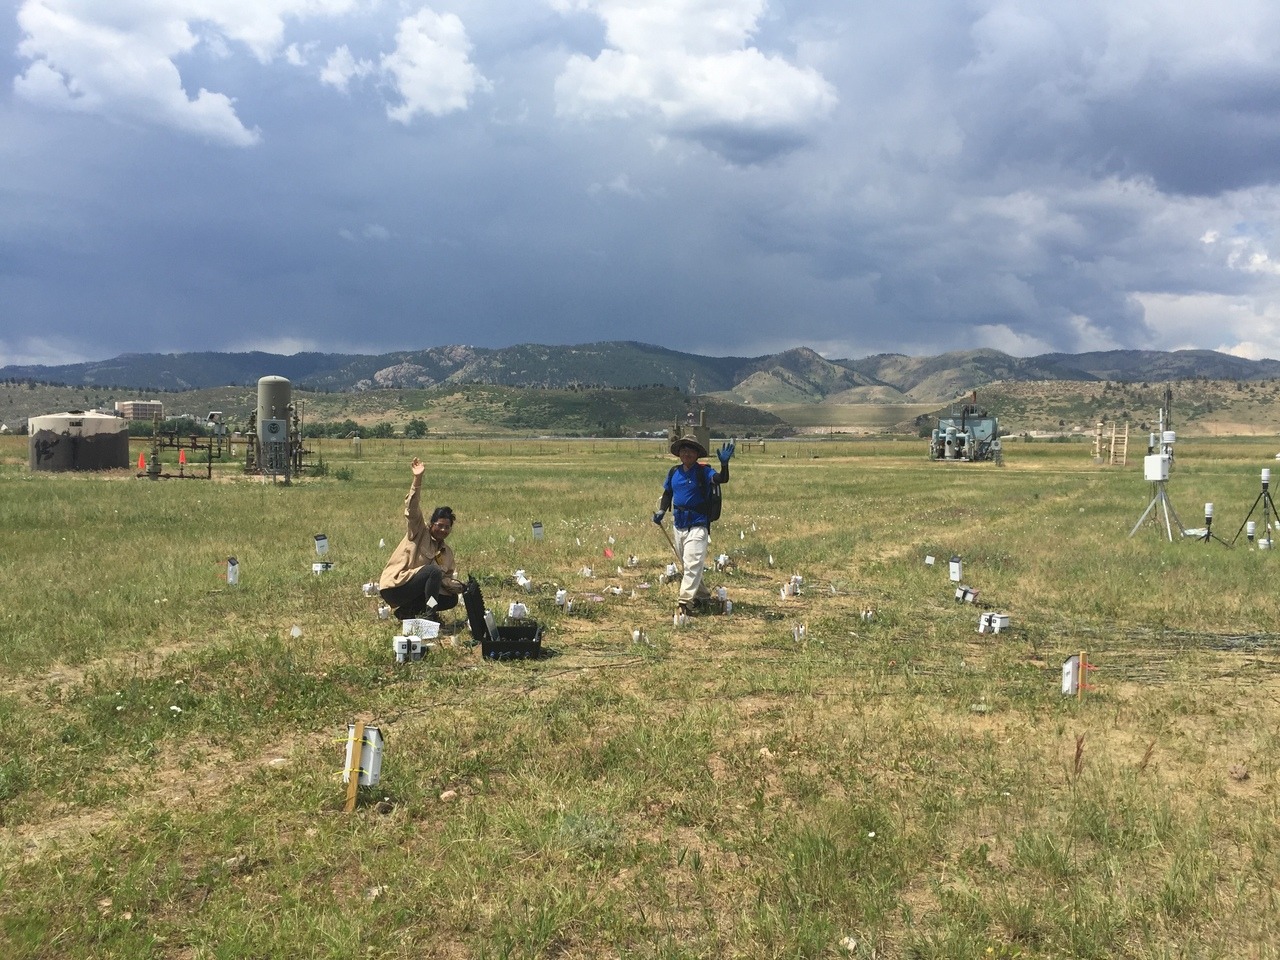 Back to the Field!
Hello from the Methane Emissions Technology Evaluation Center (METEC) (https://energy.colostate.edu/metec/) at Colorado State University (CSU) in Ft Collins! I’m Navodi Jayarathne, a PhD student in Kate Smits research group...